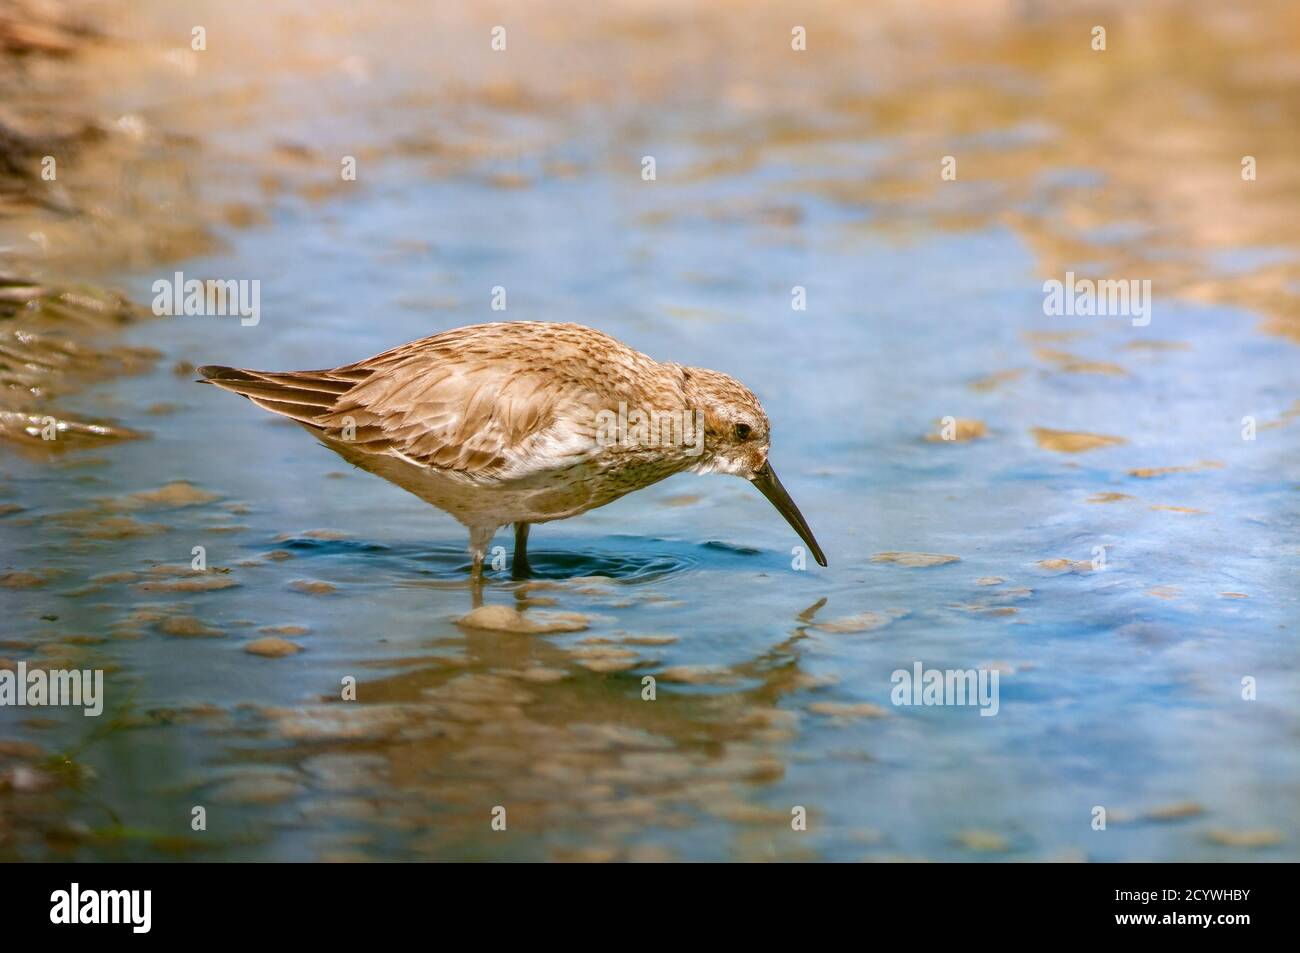 Dunlin, Calidris alpina, in winter plumage foraging in shallow water in wetland. Stock Photo